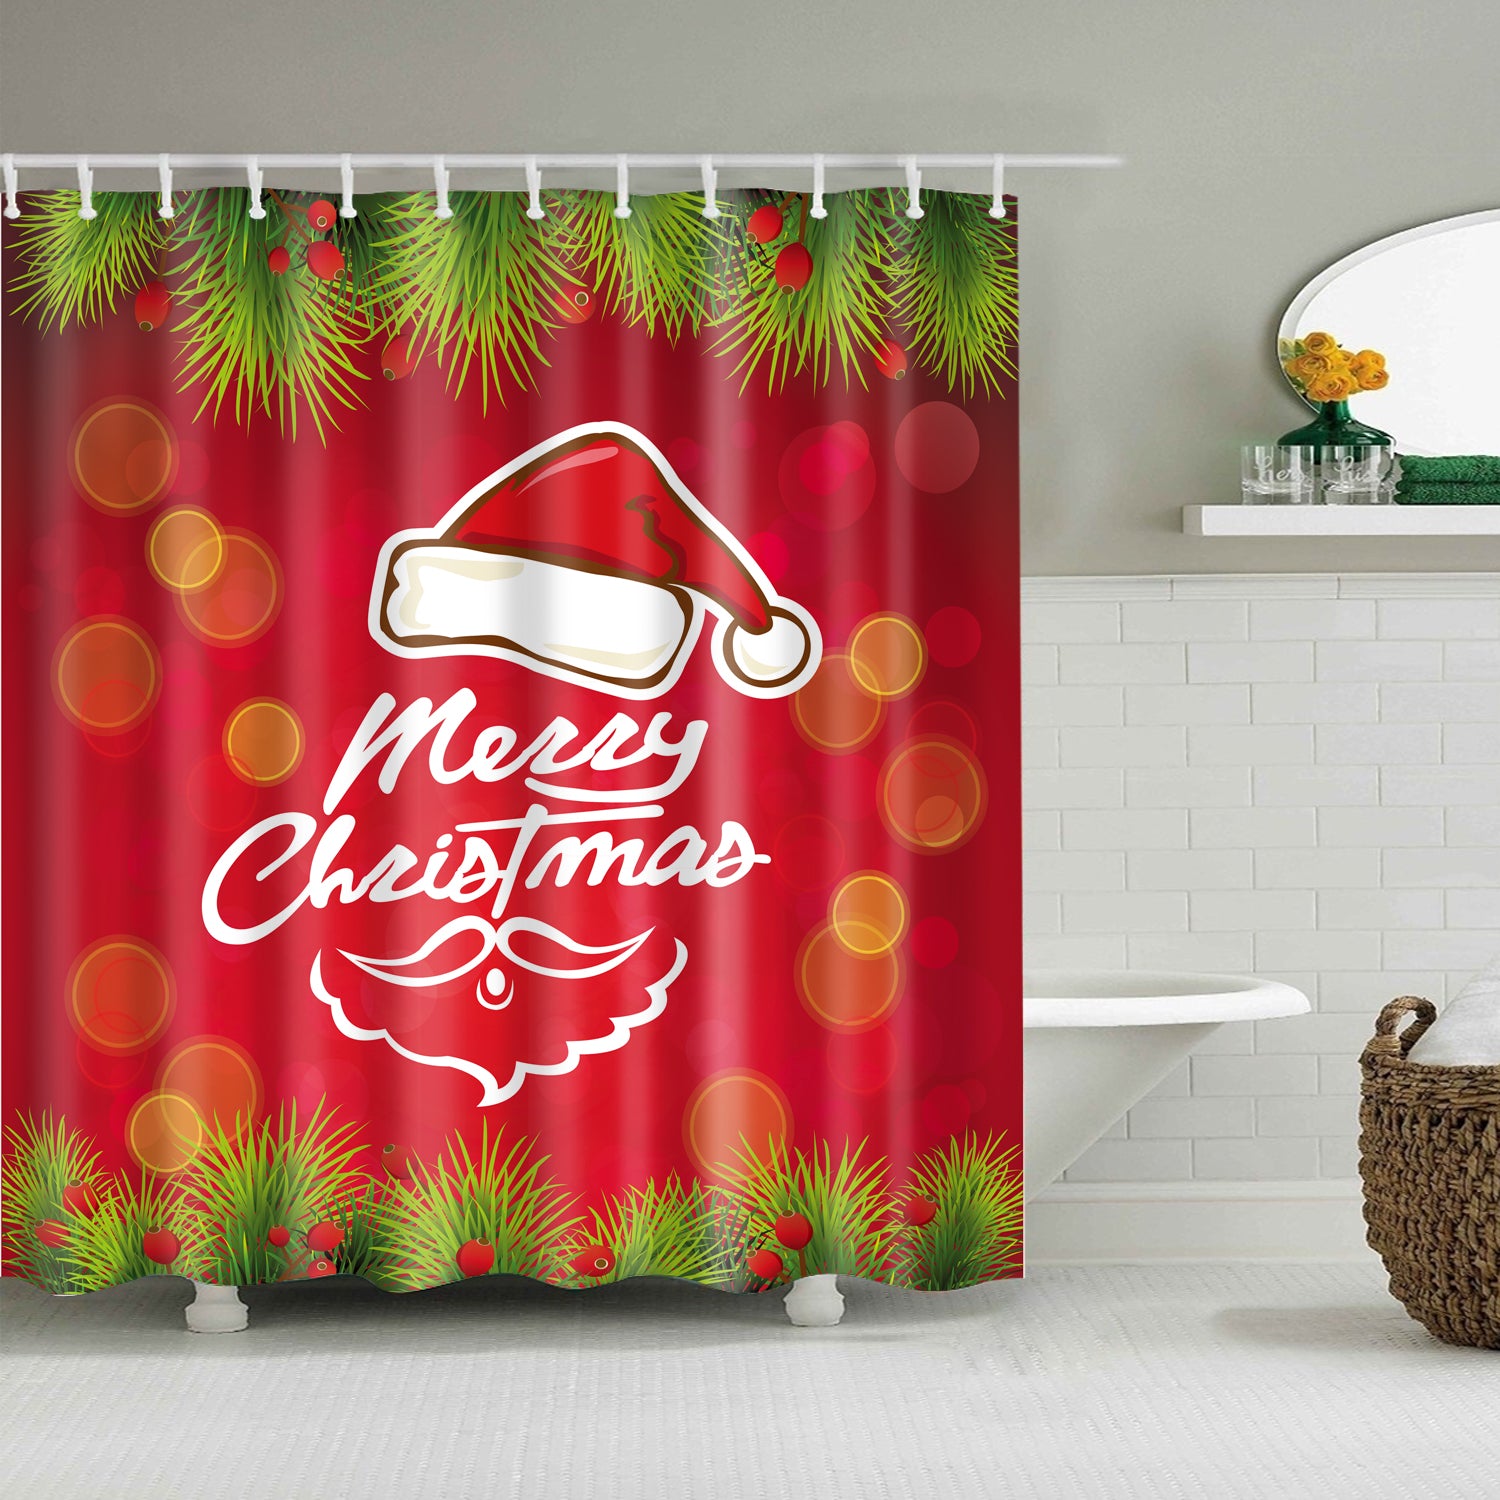 Red and Green Backdrop Christmas Quotes Shower Curtain